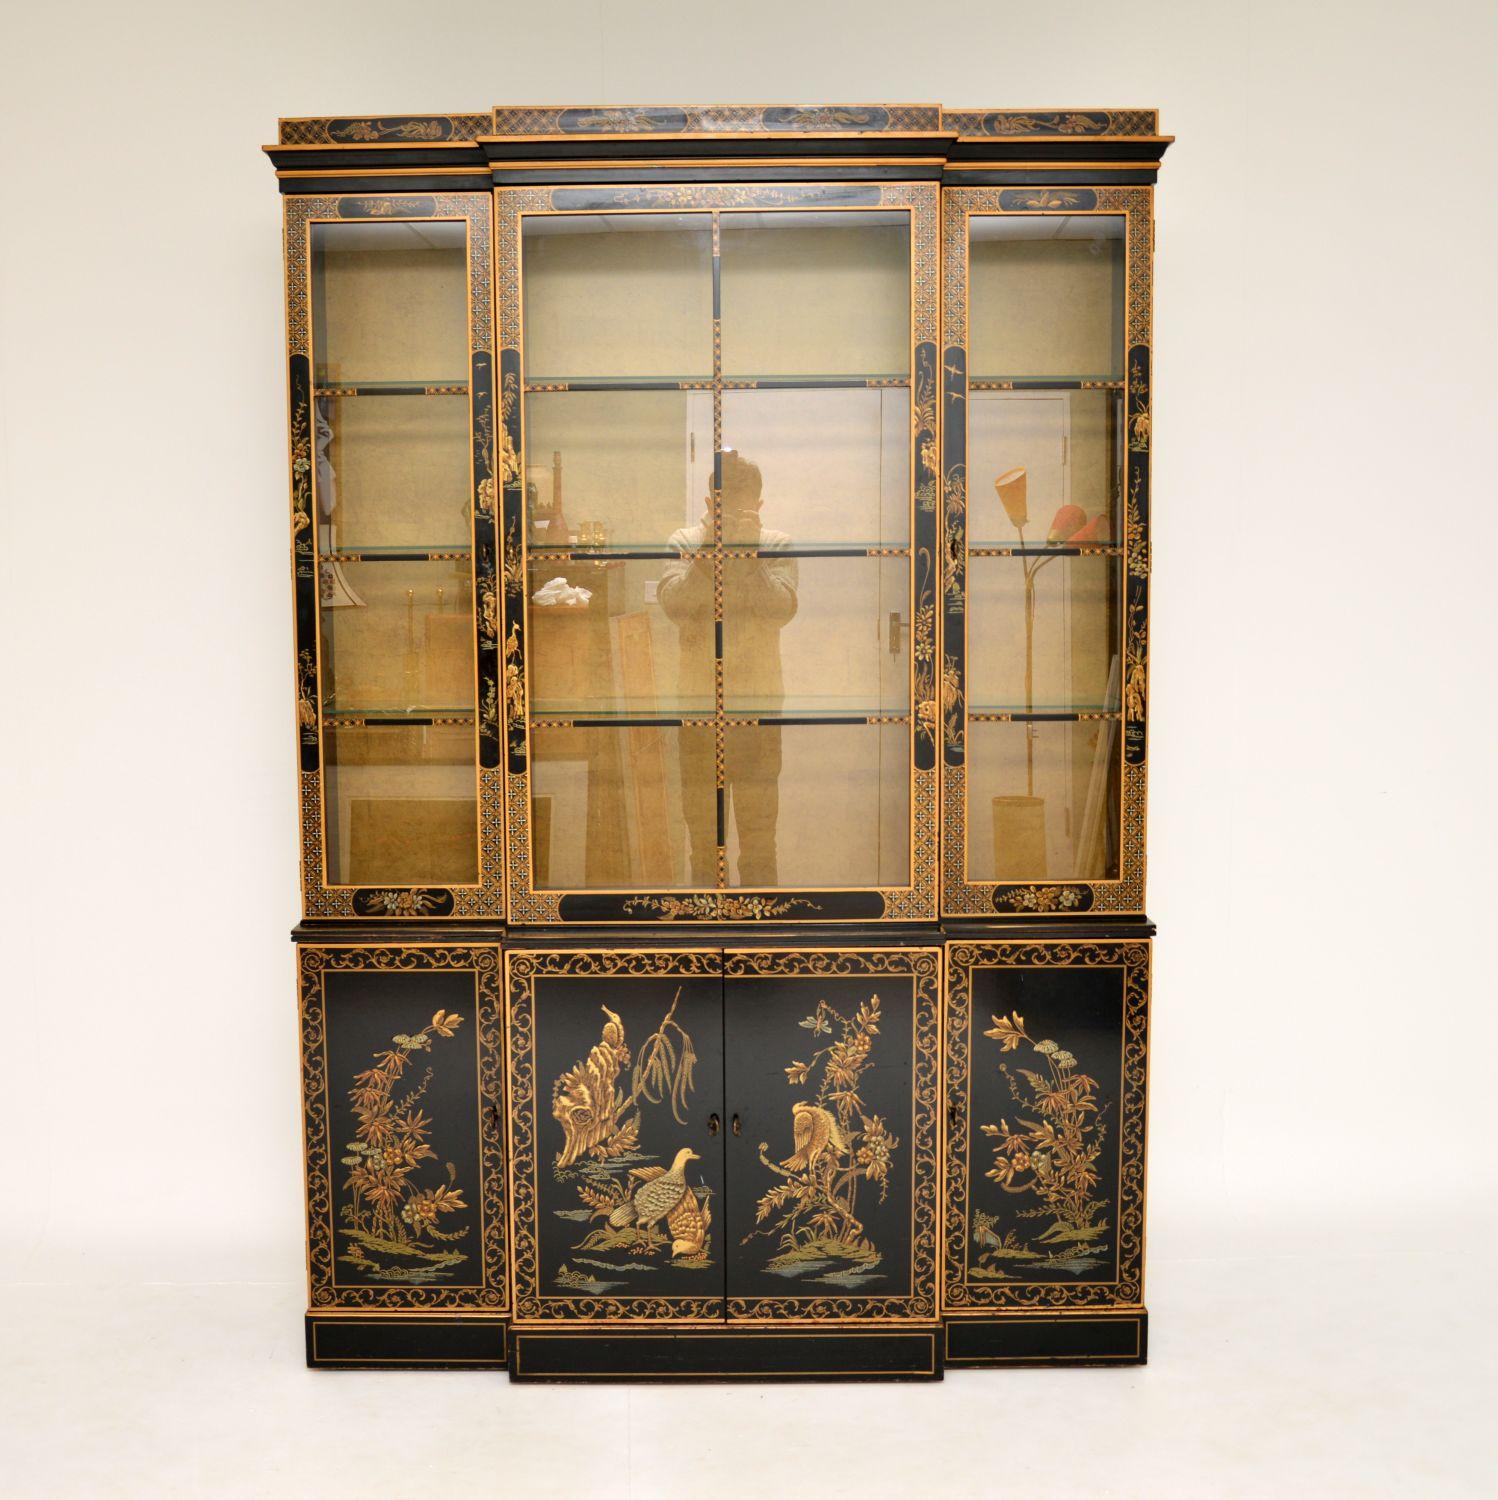 A stunning and very decorative chinoiserie breakfront bookcase / china cabinet. This was made in the USA by Drexel, it dates from around the 1960’s.

It is of amazing quality and is beautifully decorated with lacquered Chinese style chinoiserie